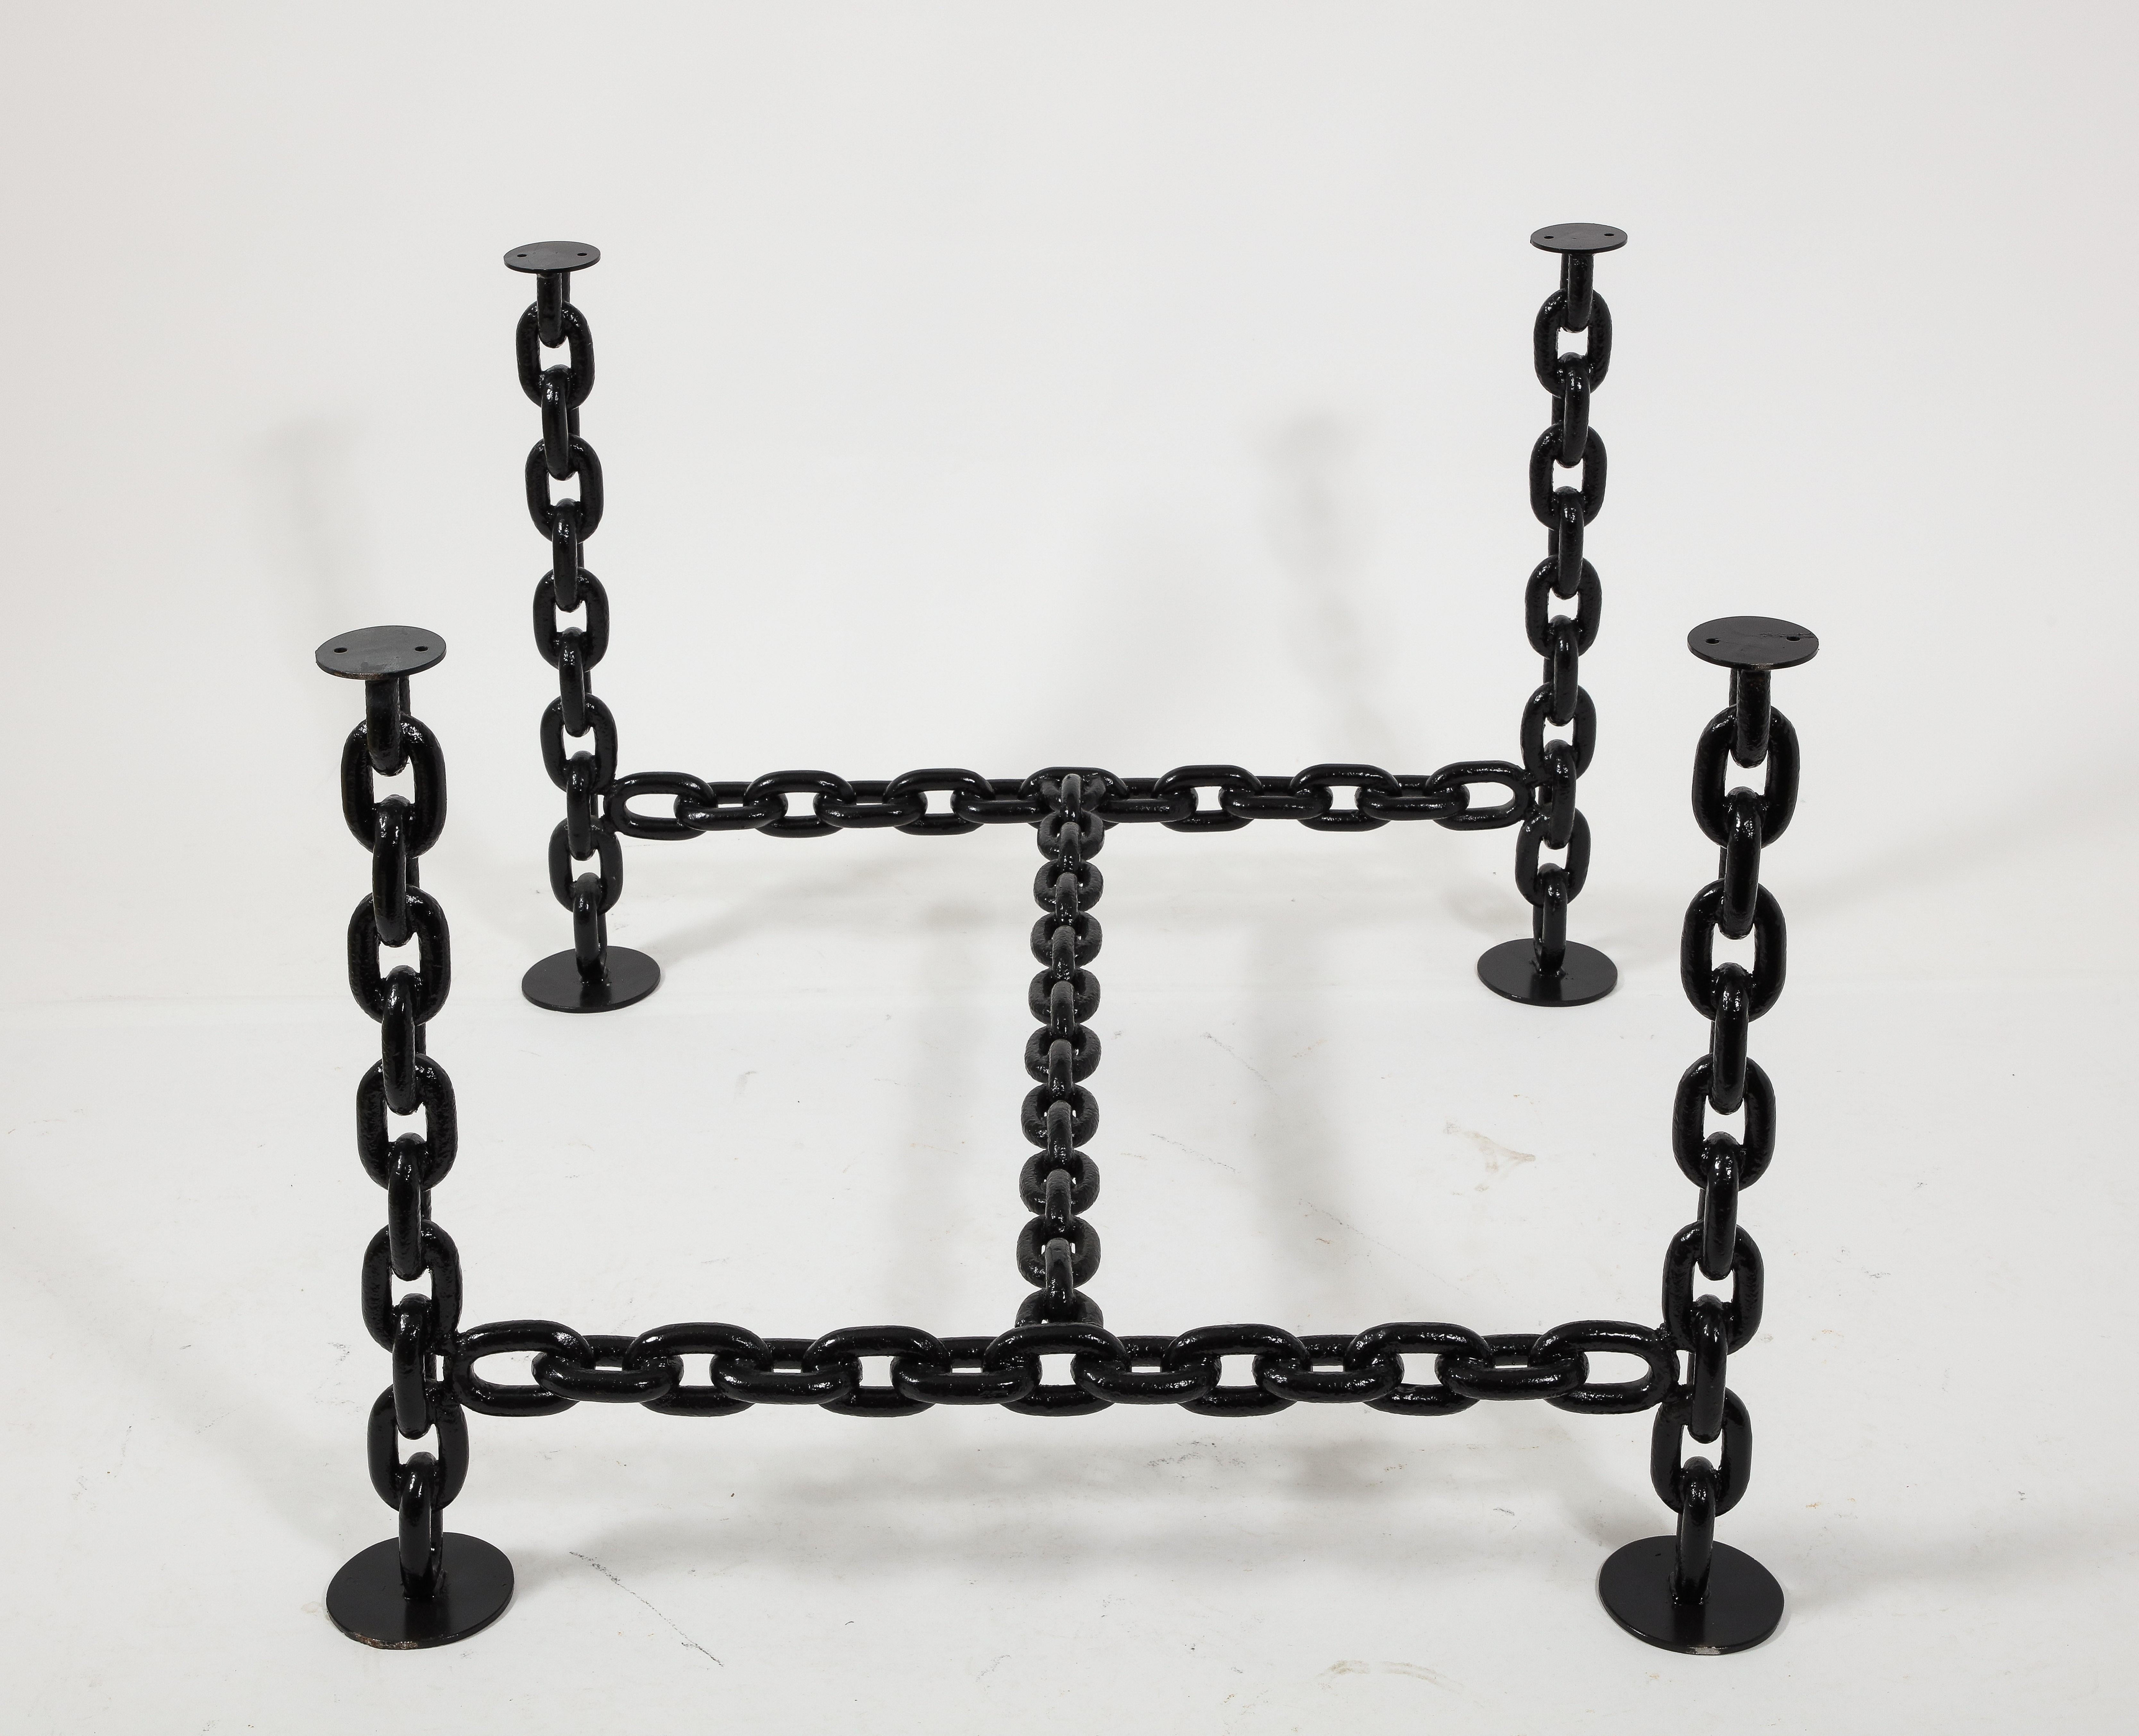 Black Lacquered Brutalist Marine Chains Dining Table Structure - France 1970s For Sale 6